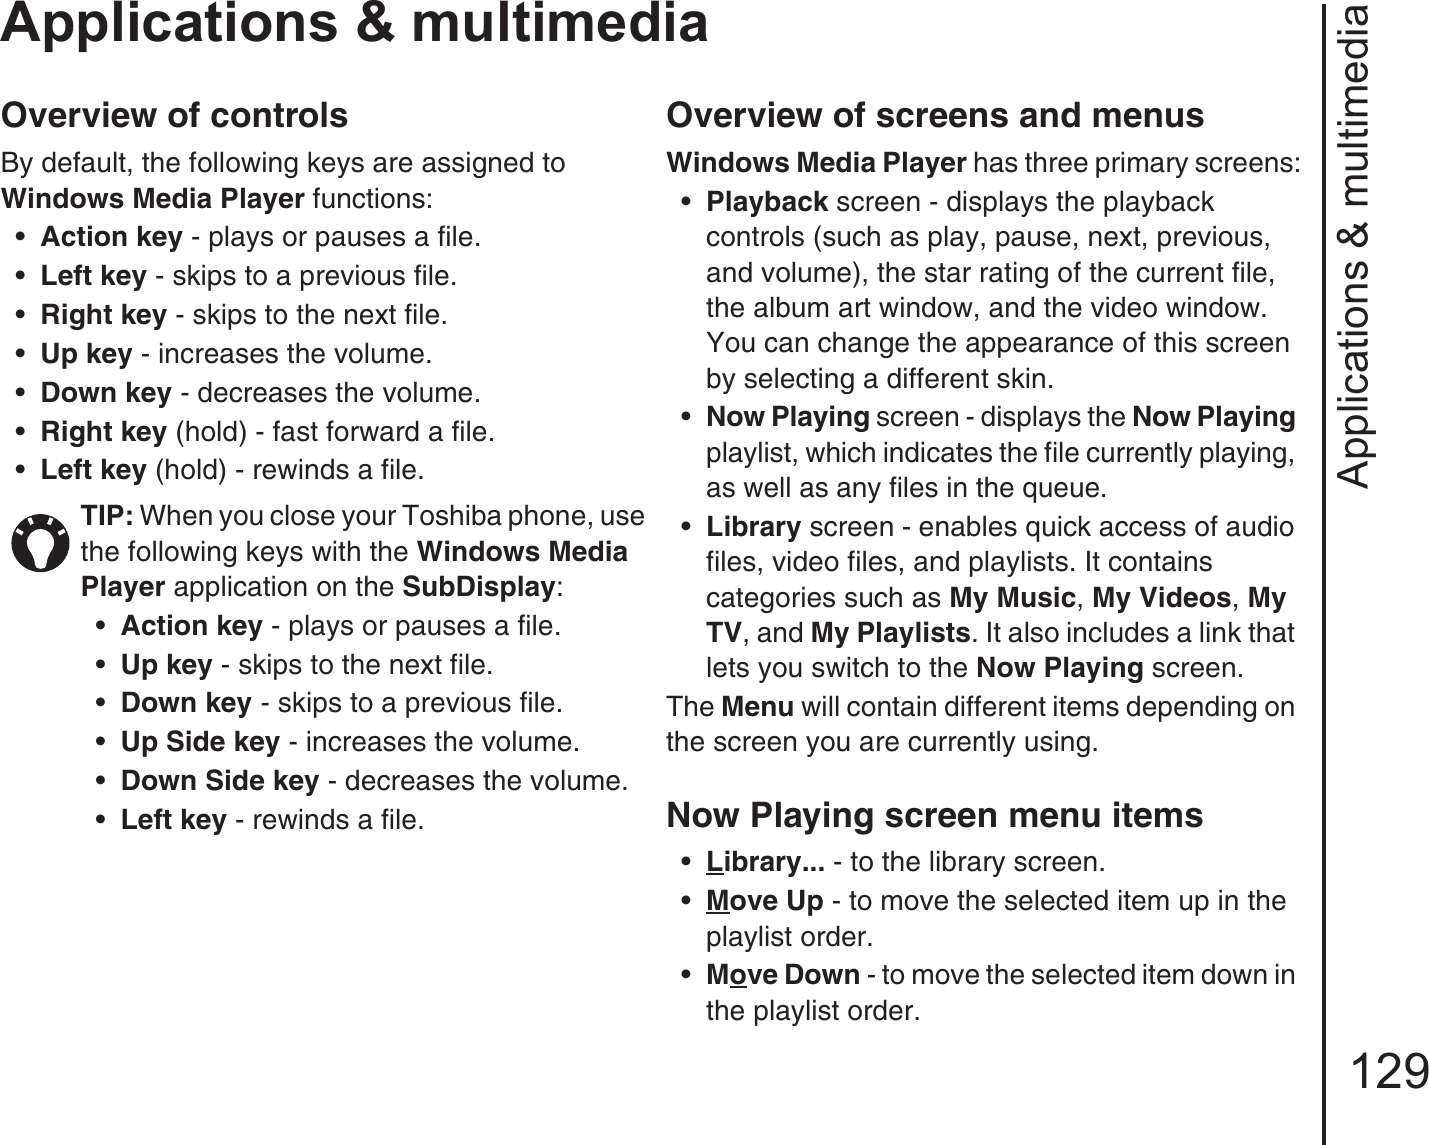 Applications &amp; multimedia129Applications &amp; multimediaOverview of controlsBy default, the following keys are assigned to Windows Media Player functions:•Action key - plays or pauses a file.•Left key - skips to a previous file.•Right key - skips to the next file.•Up key - increases the volume.•Down key - decreases the volume.•Right key (hold) - fast forward a file.•Left key (hold) - rewinds a file.Overview of screens and menus Windows Media Player has three primary screens:•Playback screen - displays the playback controls (such as play, pause, next, previous, and volume), the star rating of the current file, the album art window, and the video window. You can change the appearance of this screen by selecting a different skin.•Now Playing screen - displays the Now Playing playlist, which indicates the file currently playing, as well as any files in the queue.•Library screen - enables quick access of audio files, video files, and playlists. It contains categories such as My Music, My Videos, My TV, and My Playlists. It also includes a link that lets you switch to the Now Playing screen.The Menu will contain different items depending on the screen you are currently using.Now Playing screen menu items•Library... - to the library screen.•Move Up - to move the selected item up in the playlist order.•Move Down - to move the selected item down in the playlist order.TIP: When you close your Toshiba phone, use the following keys with the Windows Media Player application on the SubDisplay:•Action key - plays or pauses a file.•Up key - skips to the next file.•Down key - skips to a previous file.•Up Side key - increases the volume.•Down Side key - decreases the volume.•Left key - rewinds a file.